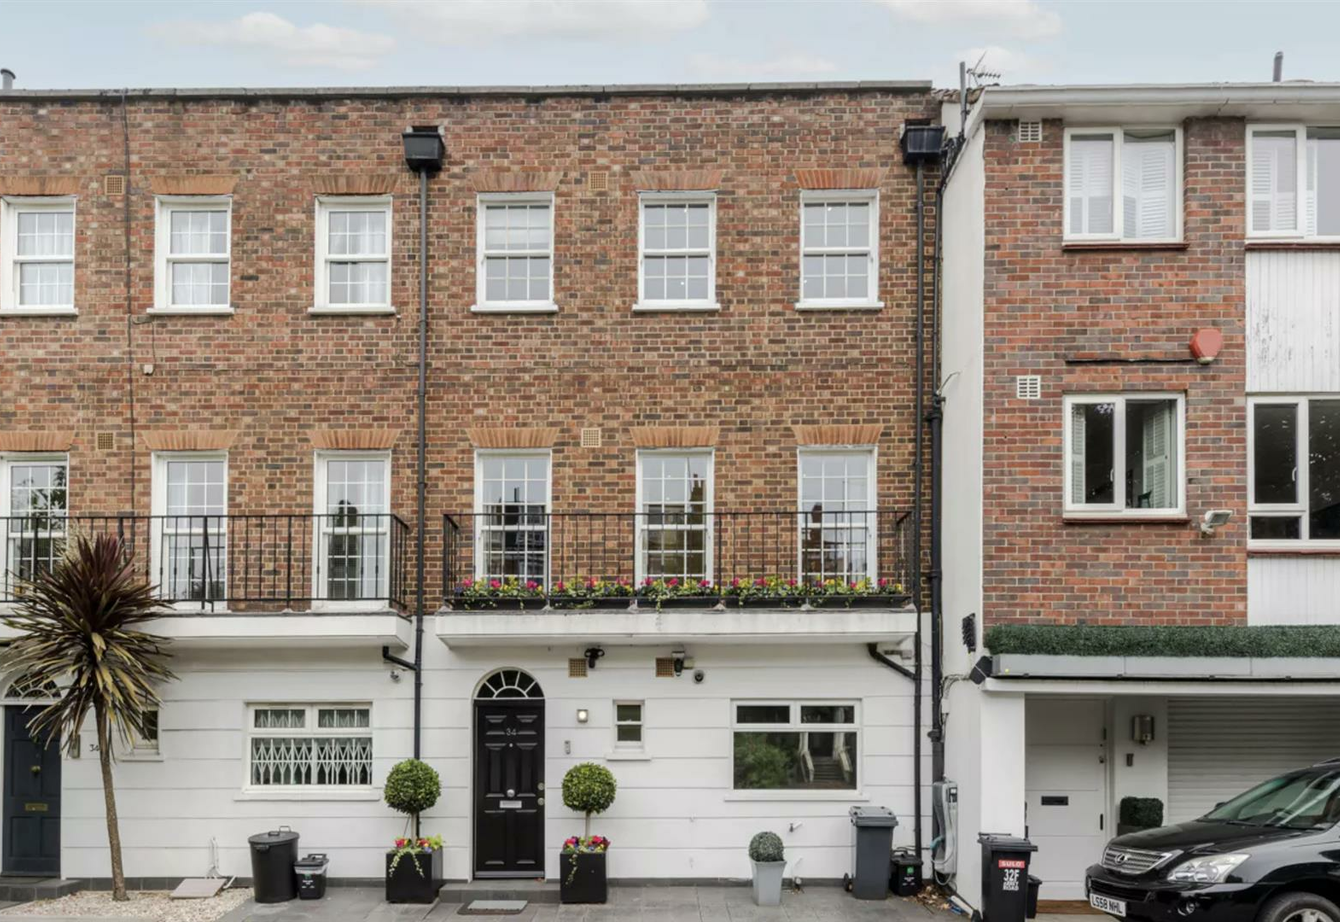 for-sale-abbey-road-london-410-view1